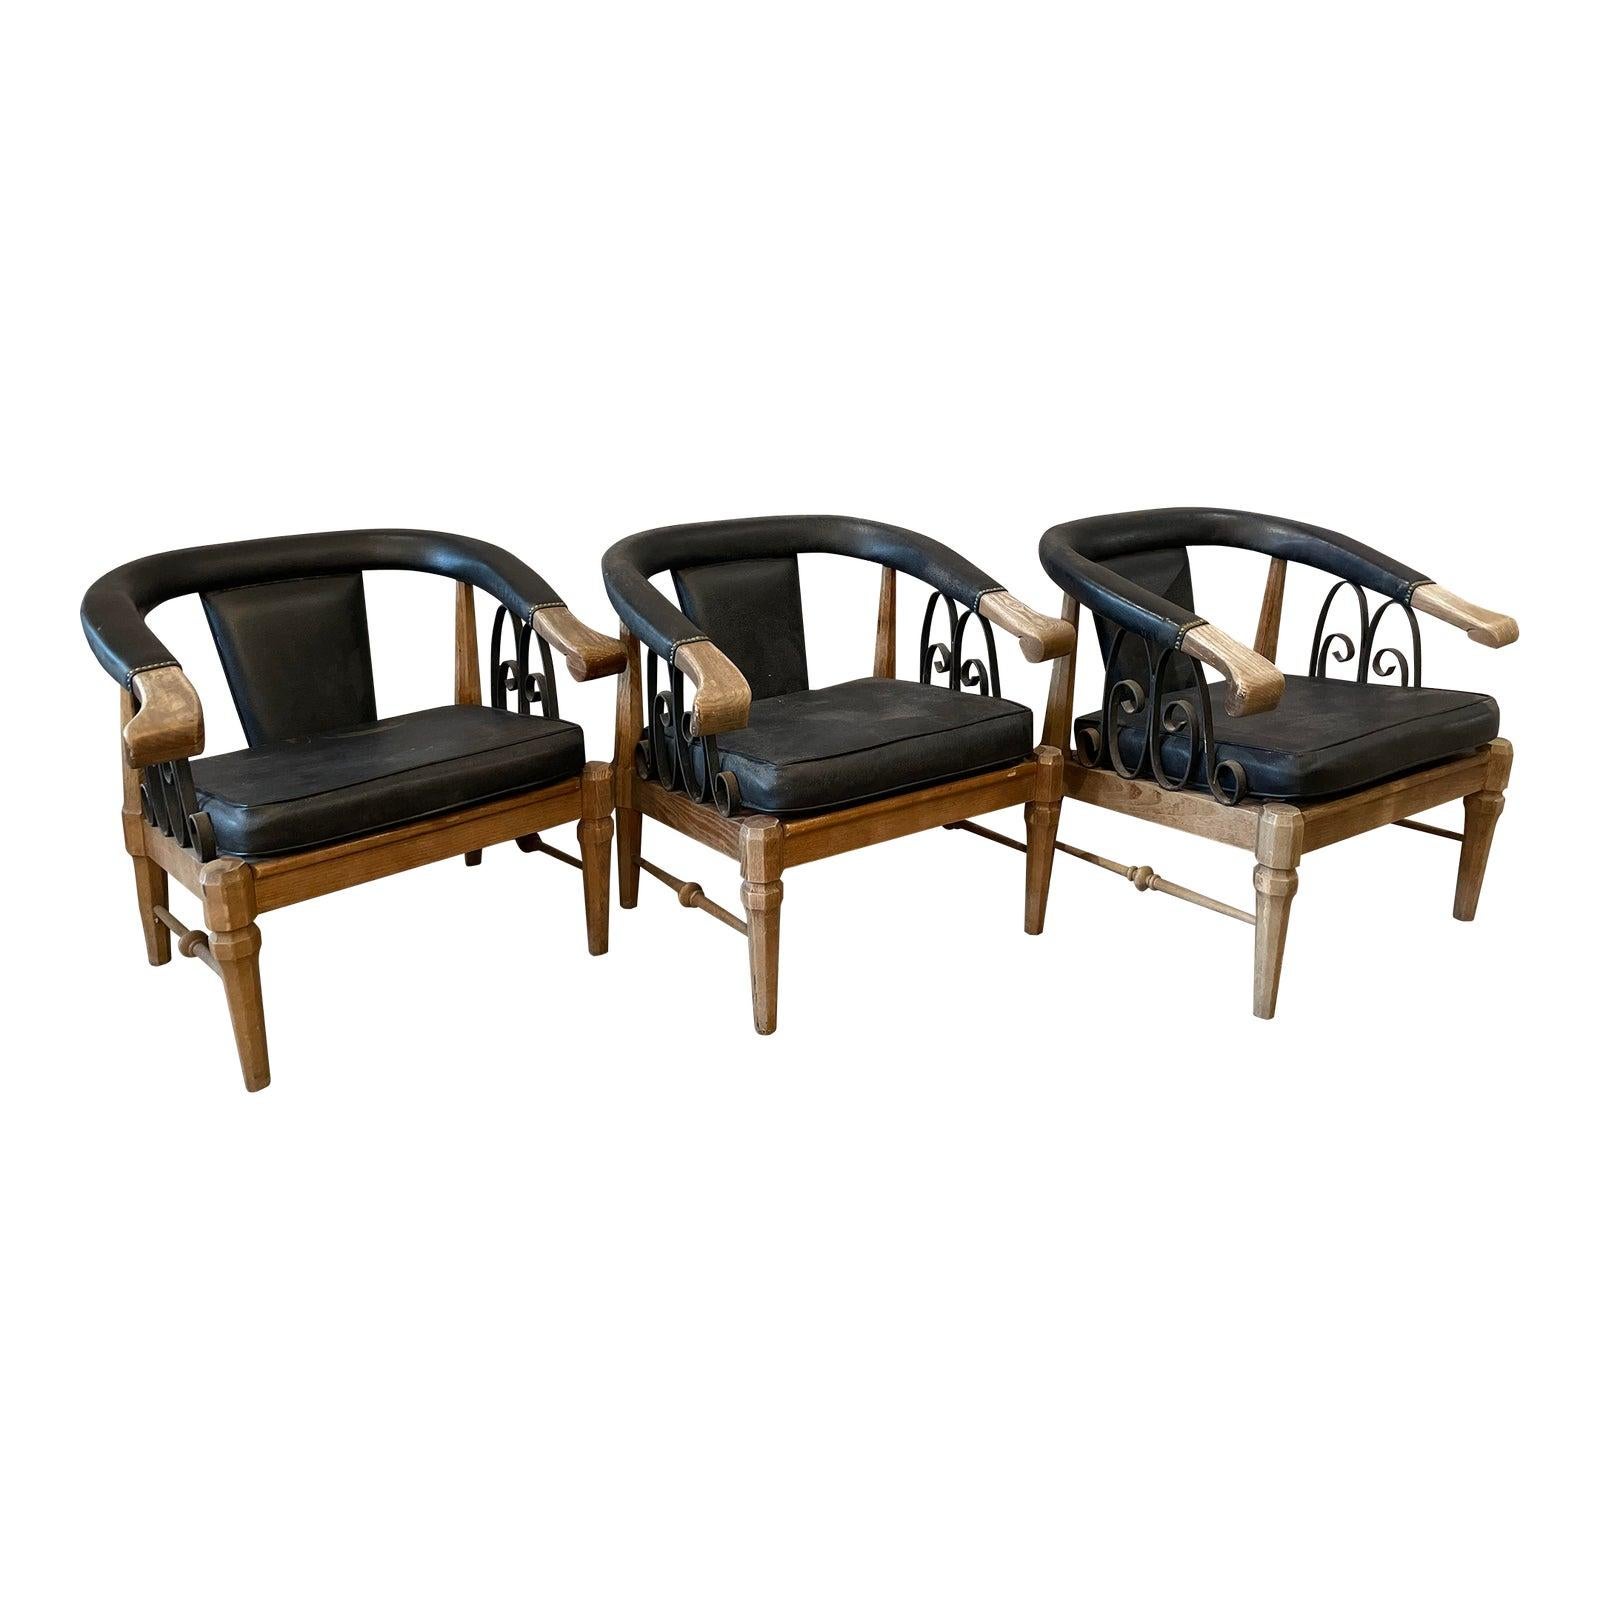 1980s Vintage Horseshoe Chairs - Set of 3 For Sale